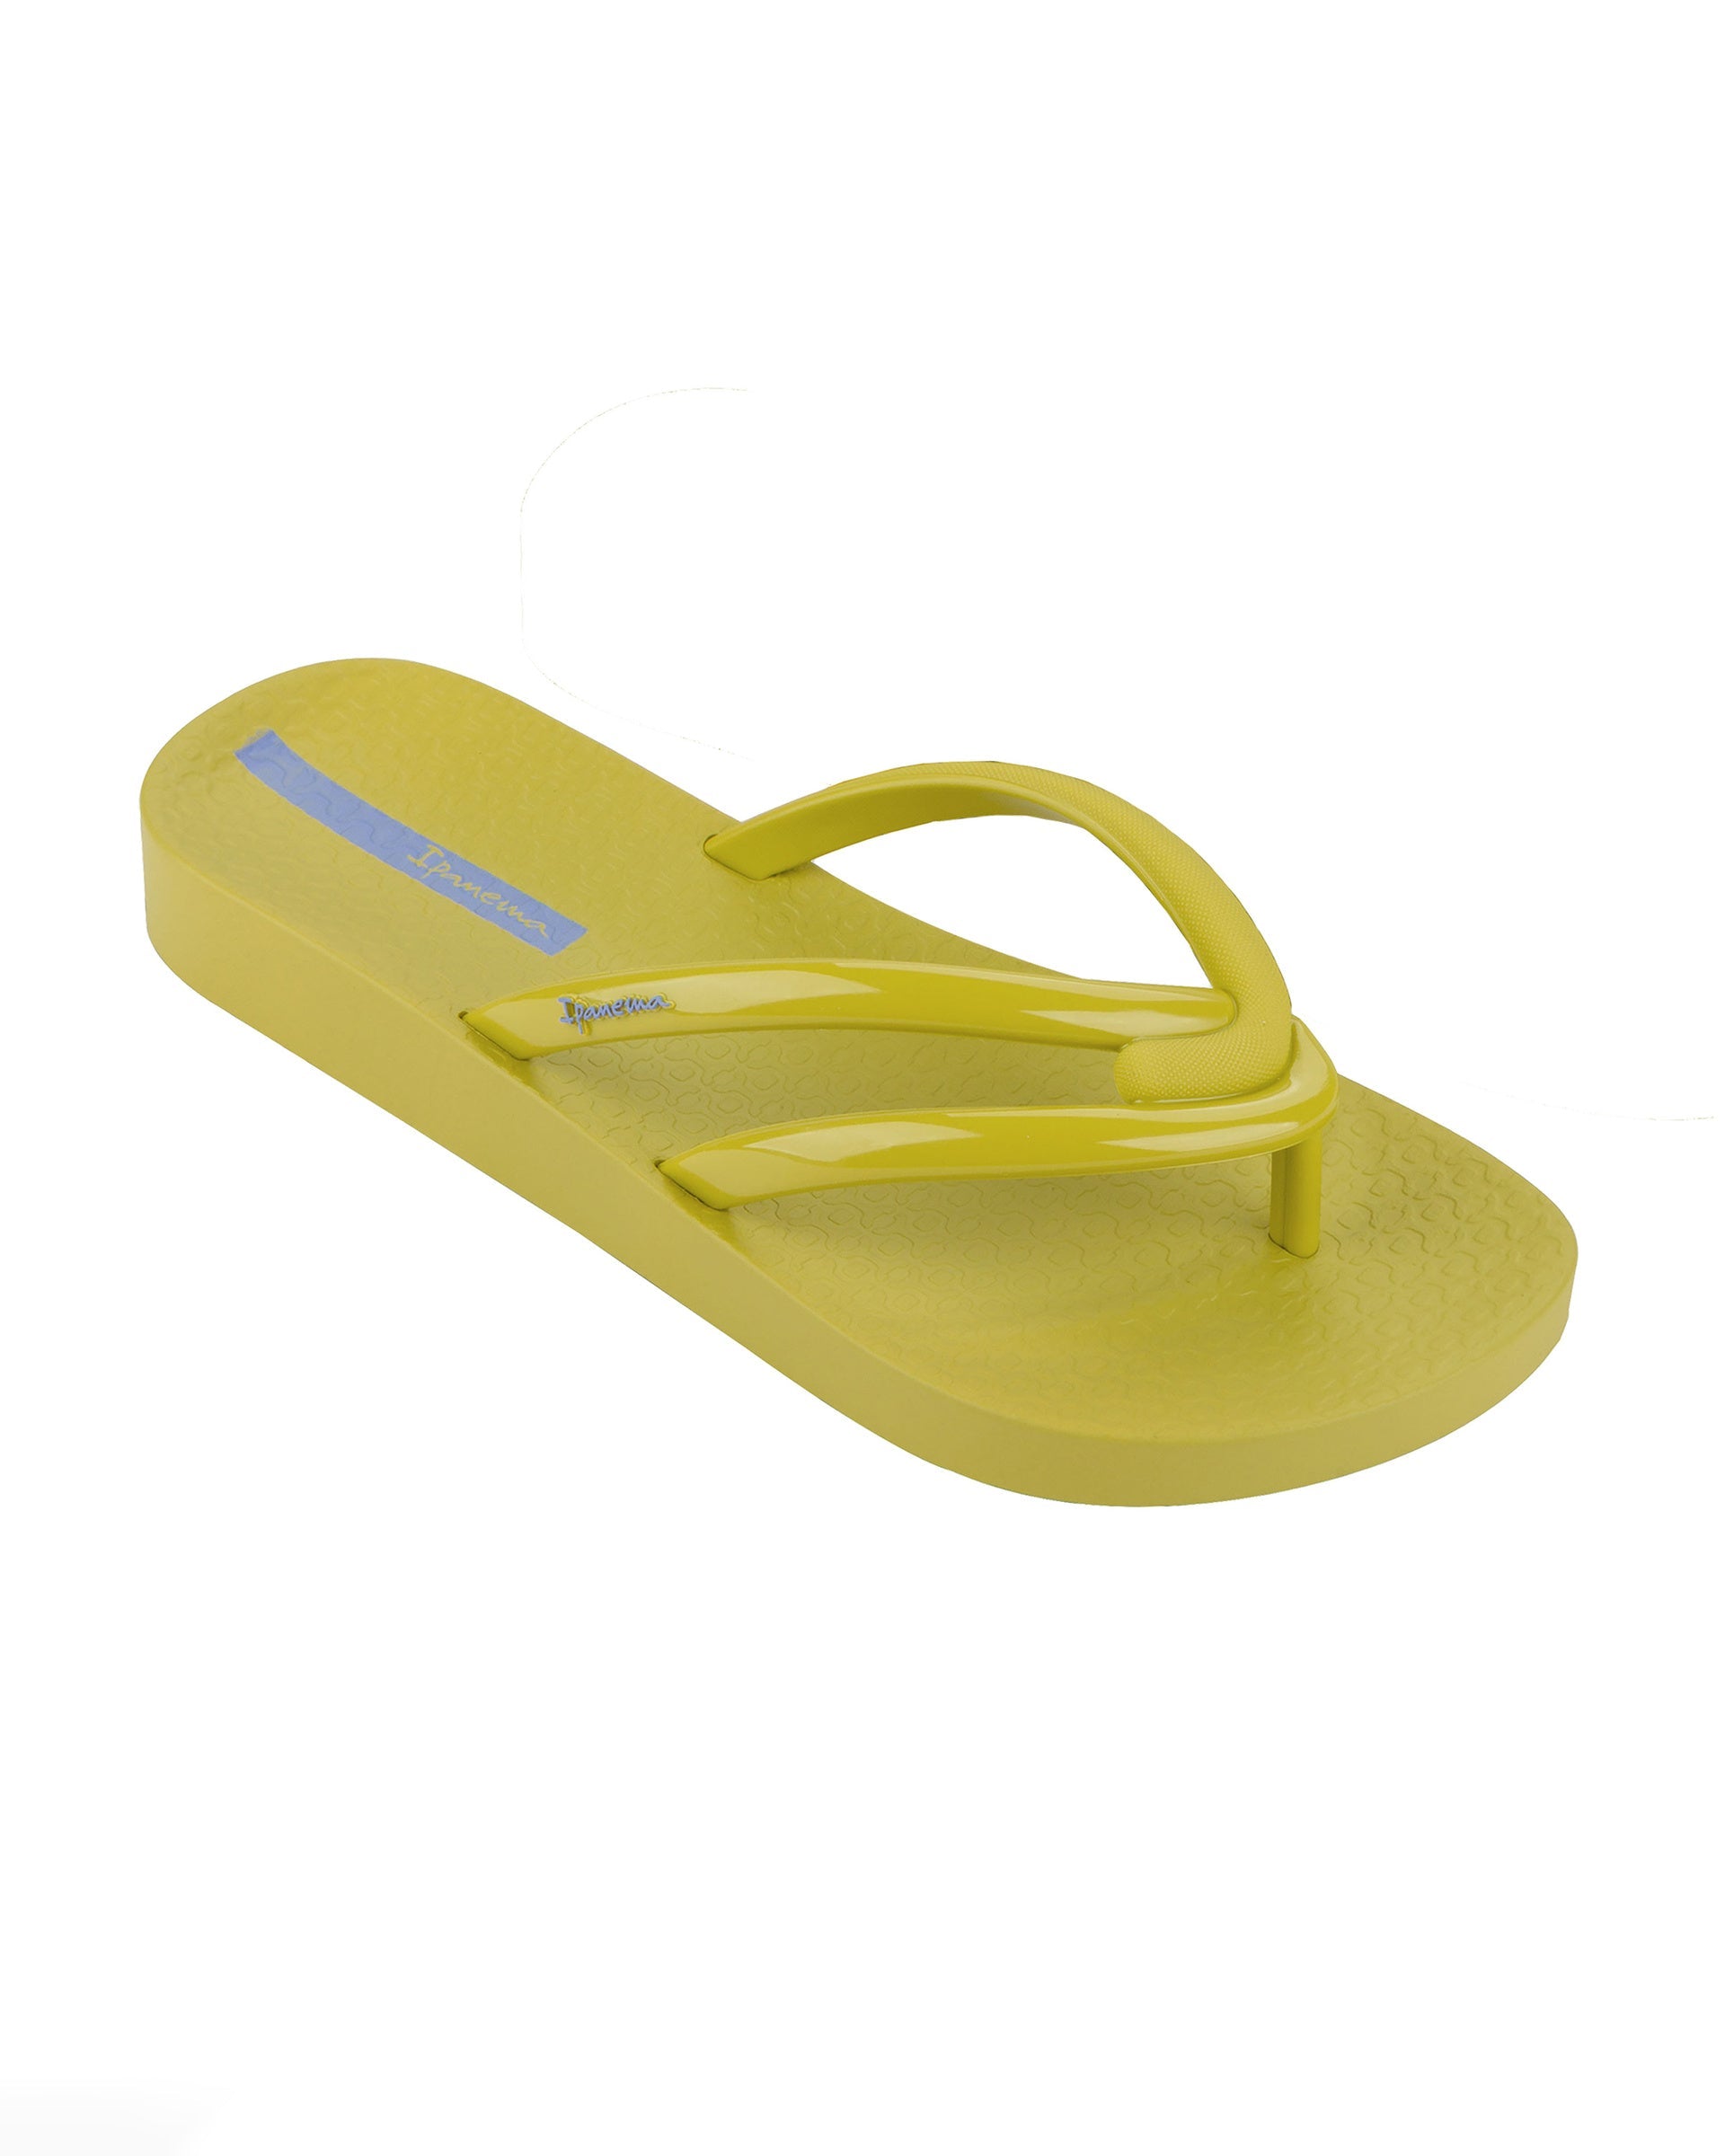 Angled view of a green Ipanema Comfy women's flip flop.